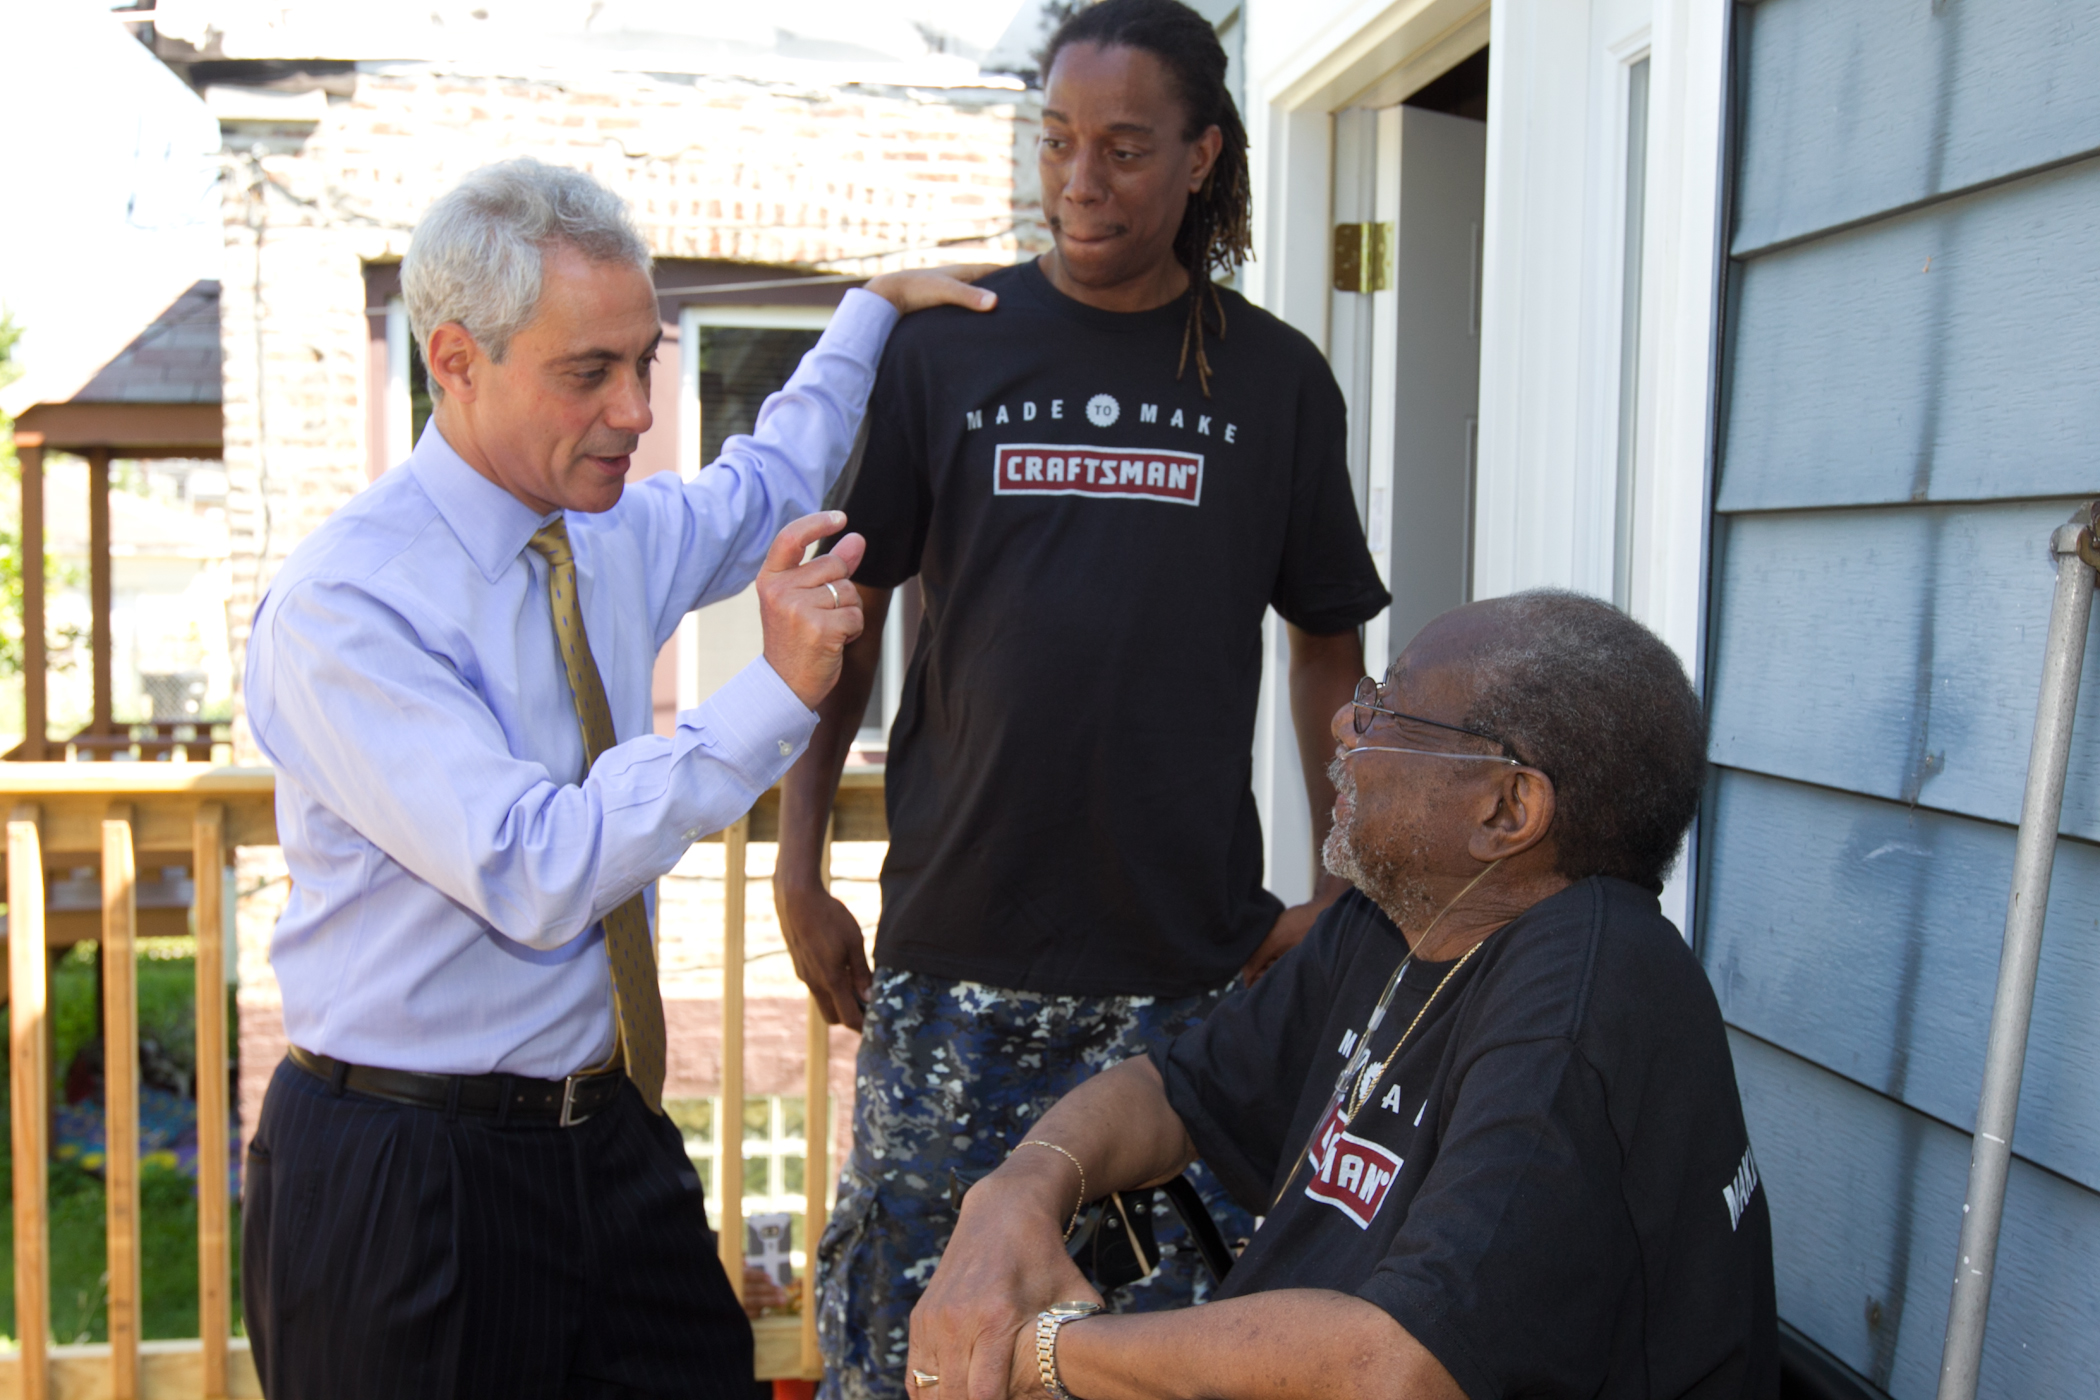 Mayor Emanuel speaks to Mac Jones and son, Mac Jr. at the Craftsman “Make a Difference” Tour.